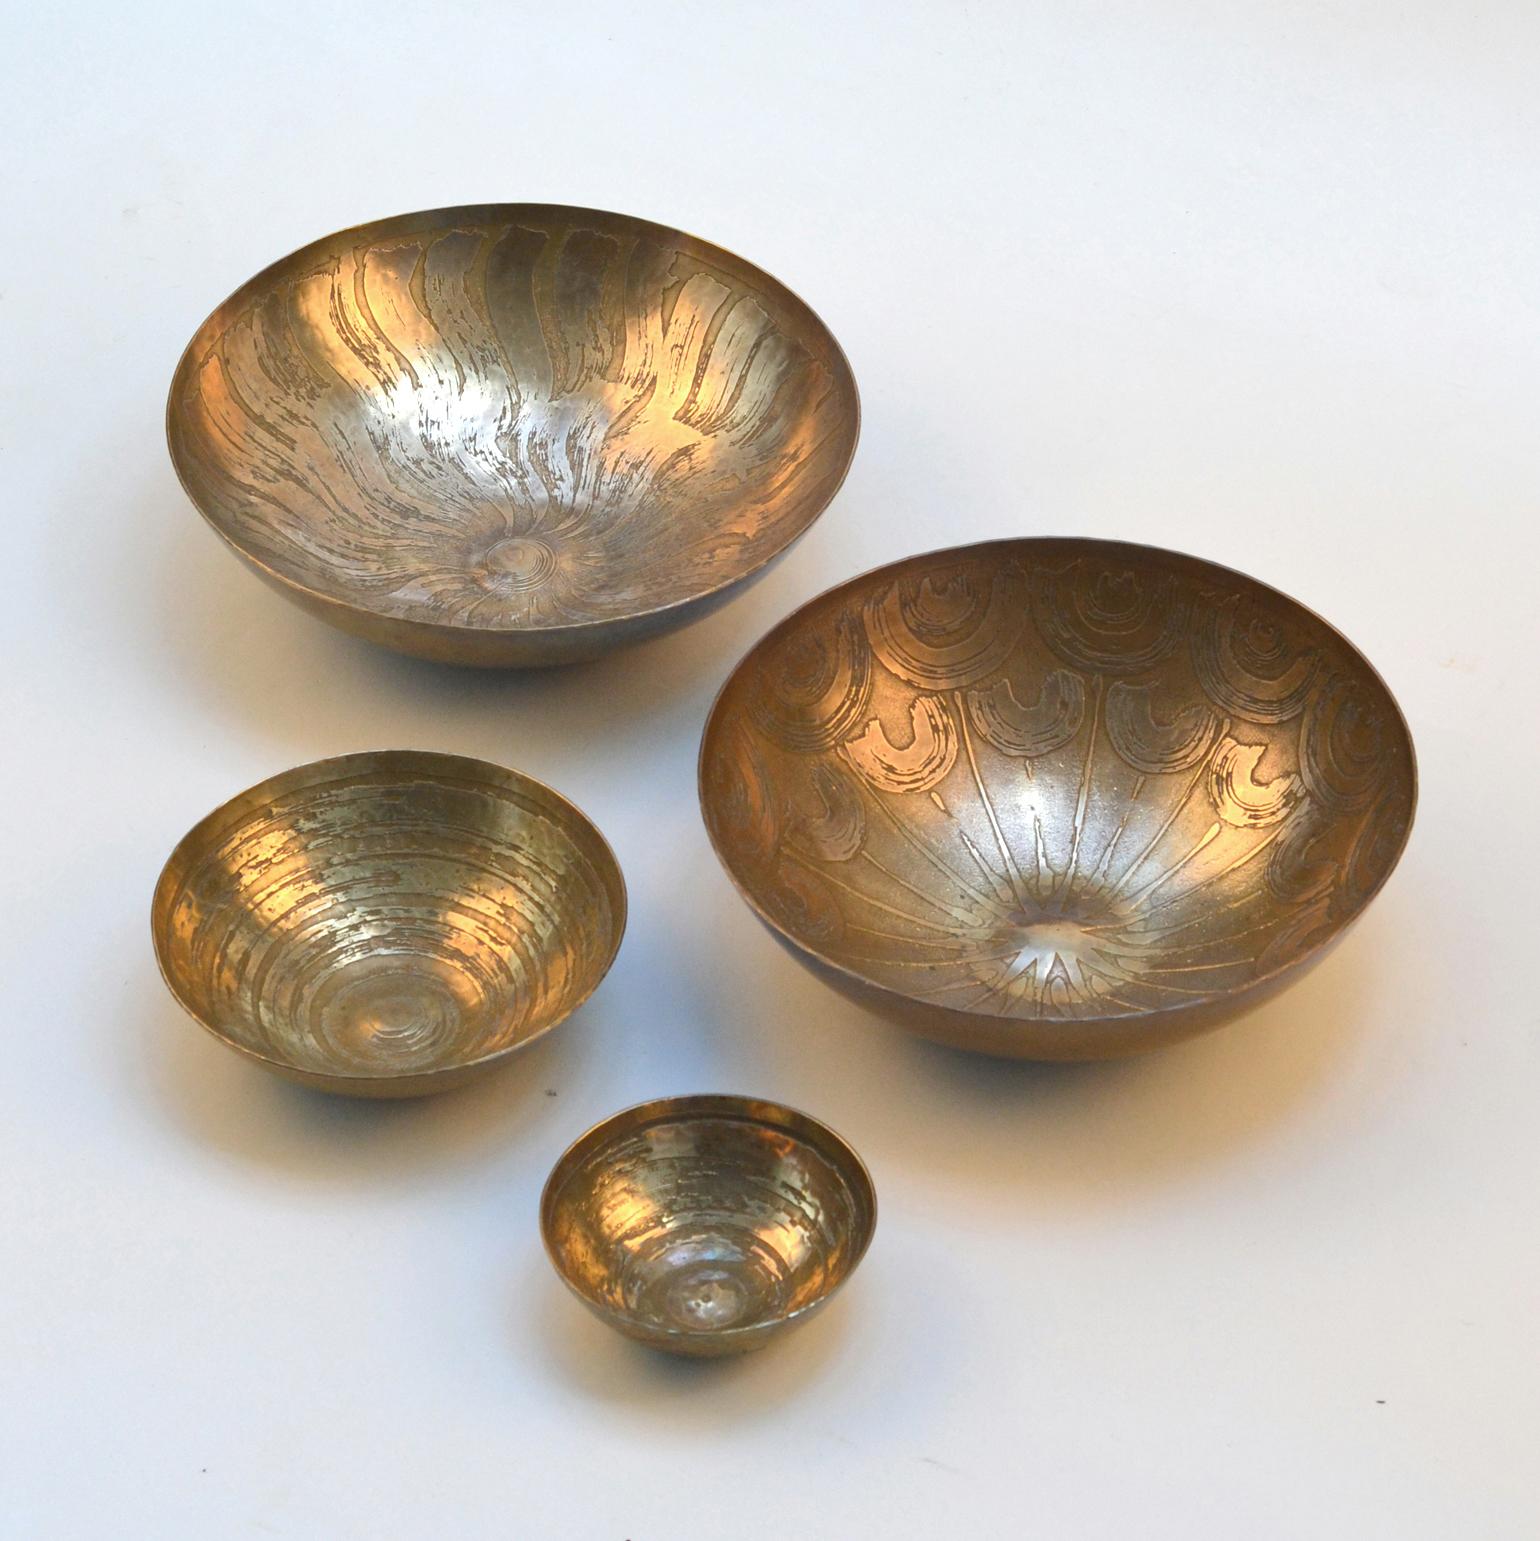 Four hand formed and etched decorative brass bowls designed by Michael Harjes and produced by Harjes Metallkunst, Bremen, West Germany, 1950's-60's. The etched technique of decoration is performed by hand painting strong acid which cuts into the